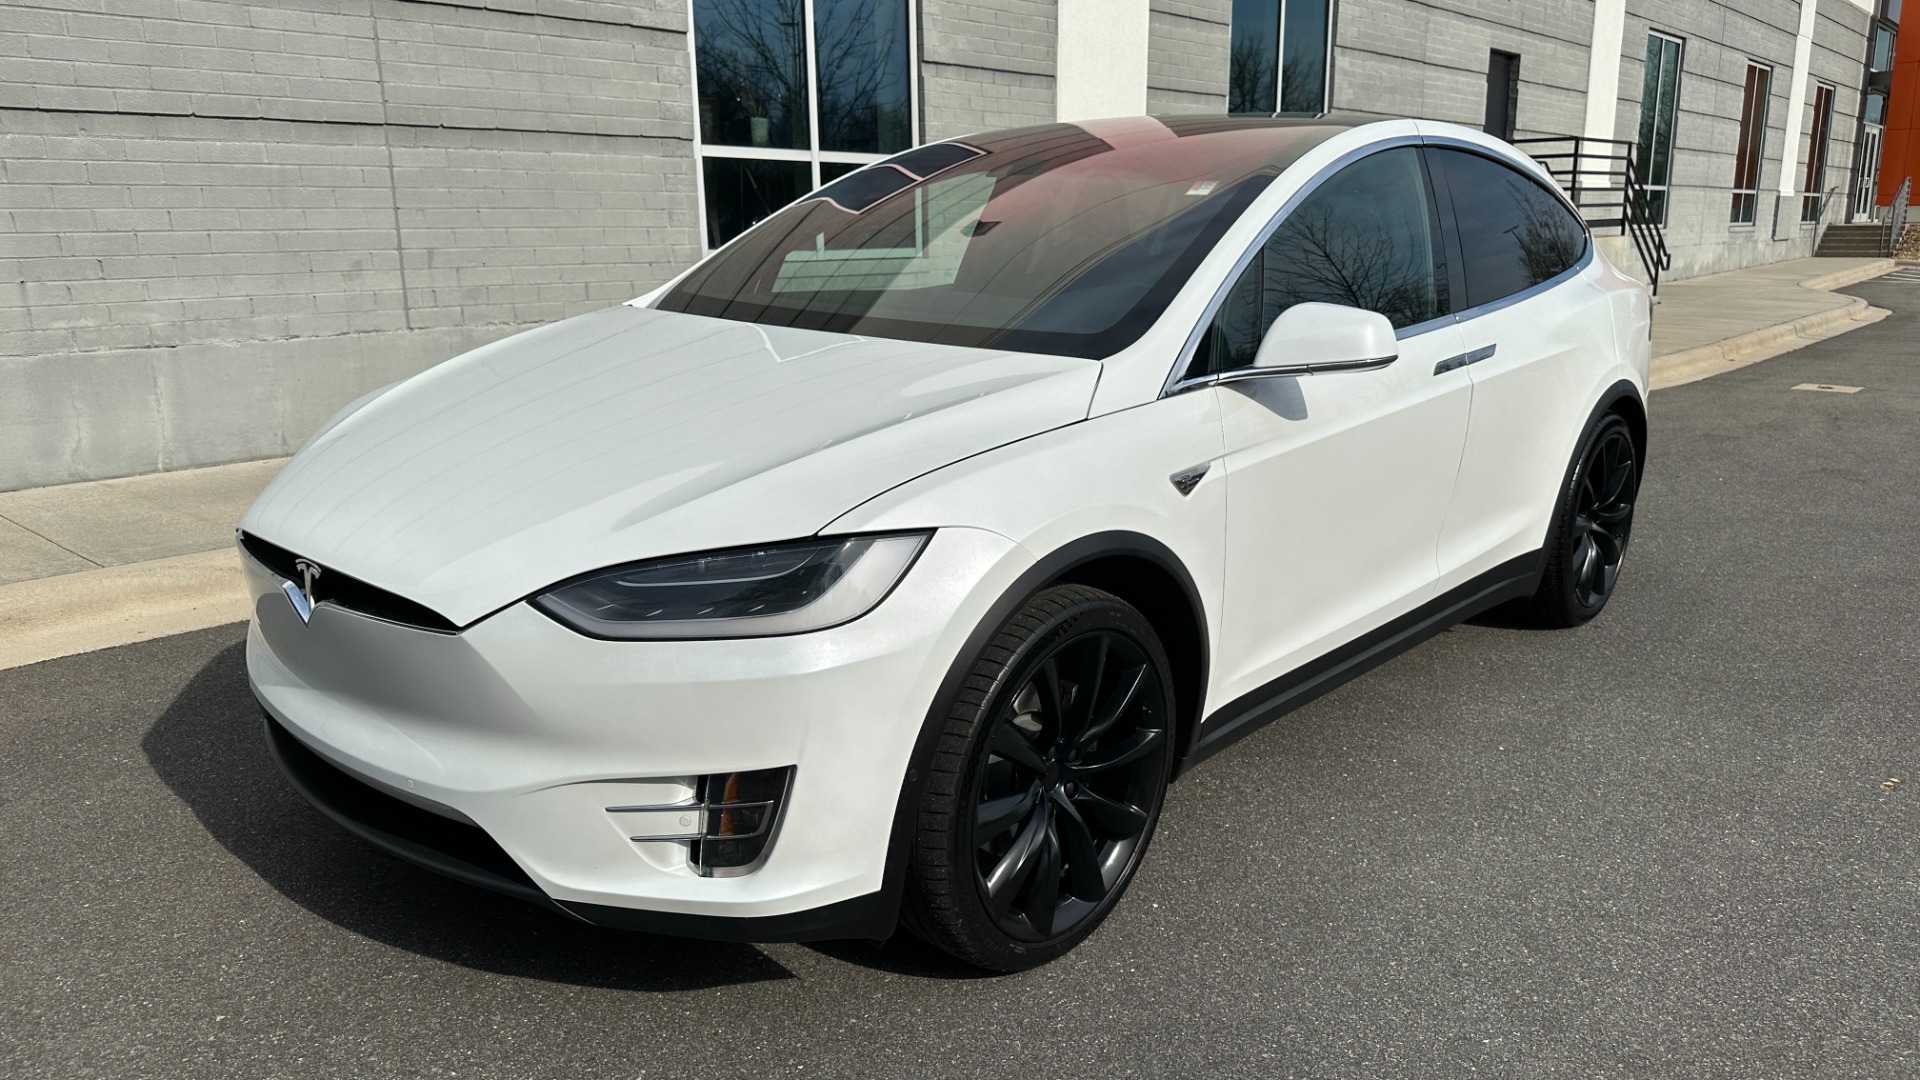 Used 2016 Tesla Model X 90D / HIGHWAY AUTOPILOT / LEATHER / 3RD ROW / CAPTAIN CHAIRS for sale $55,400 at Formula Imports in Charlotte NC 28227 2